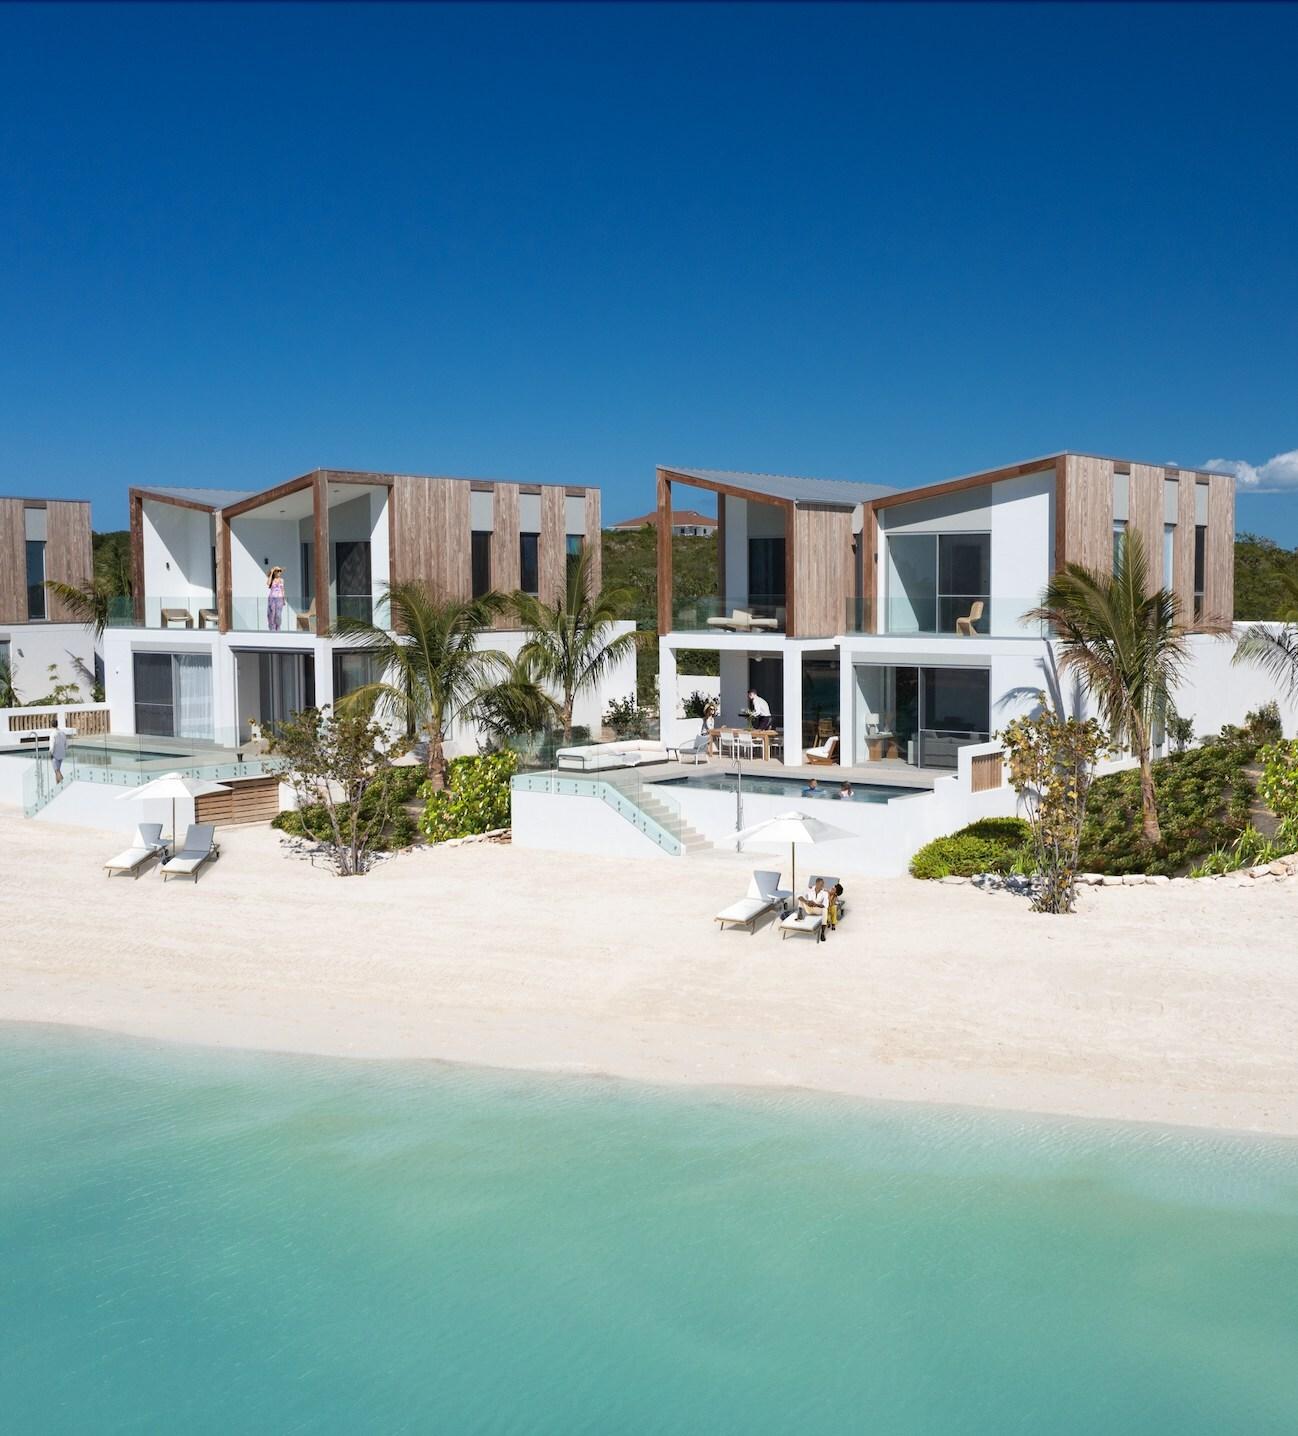 South Bank, the Newest Iconic Luxury Oceanfront Resort & Marina, is set to open on the Southern Shores of Providenciales in Turks & Caicos this November